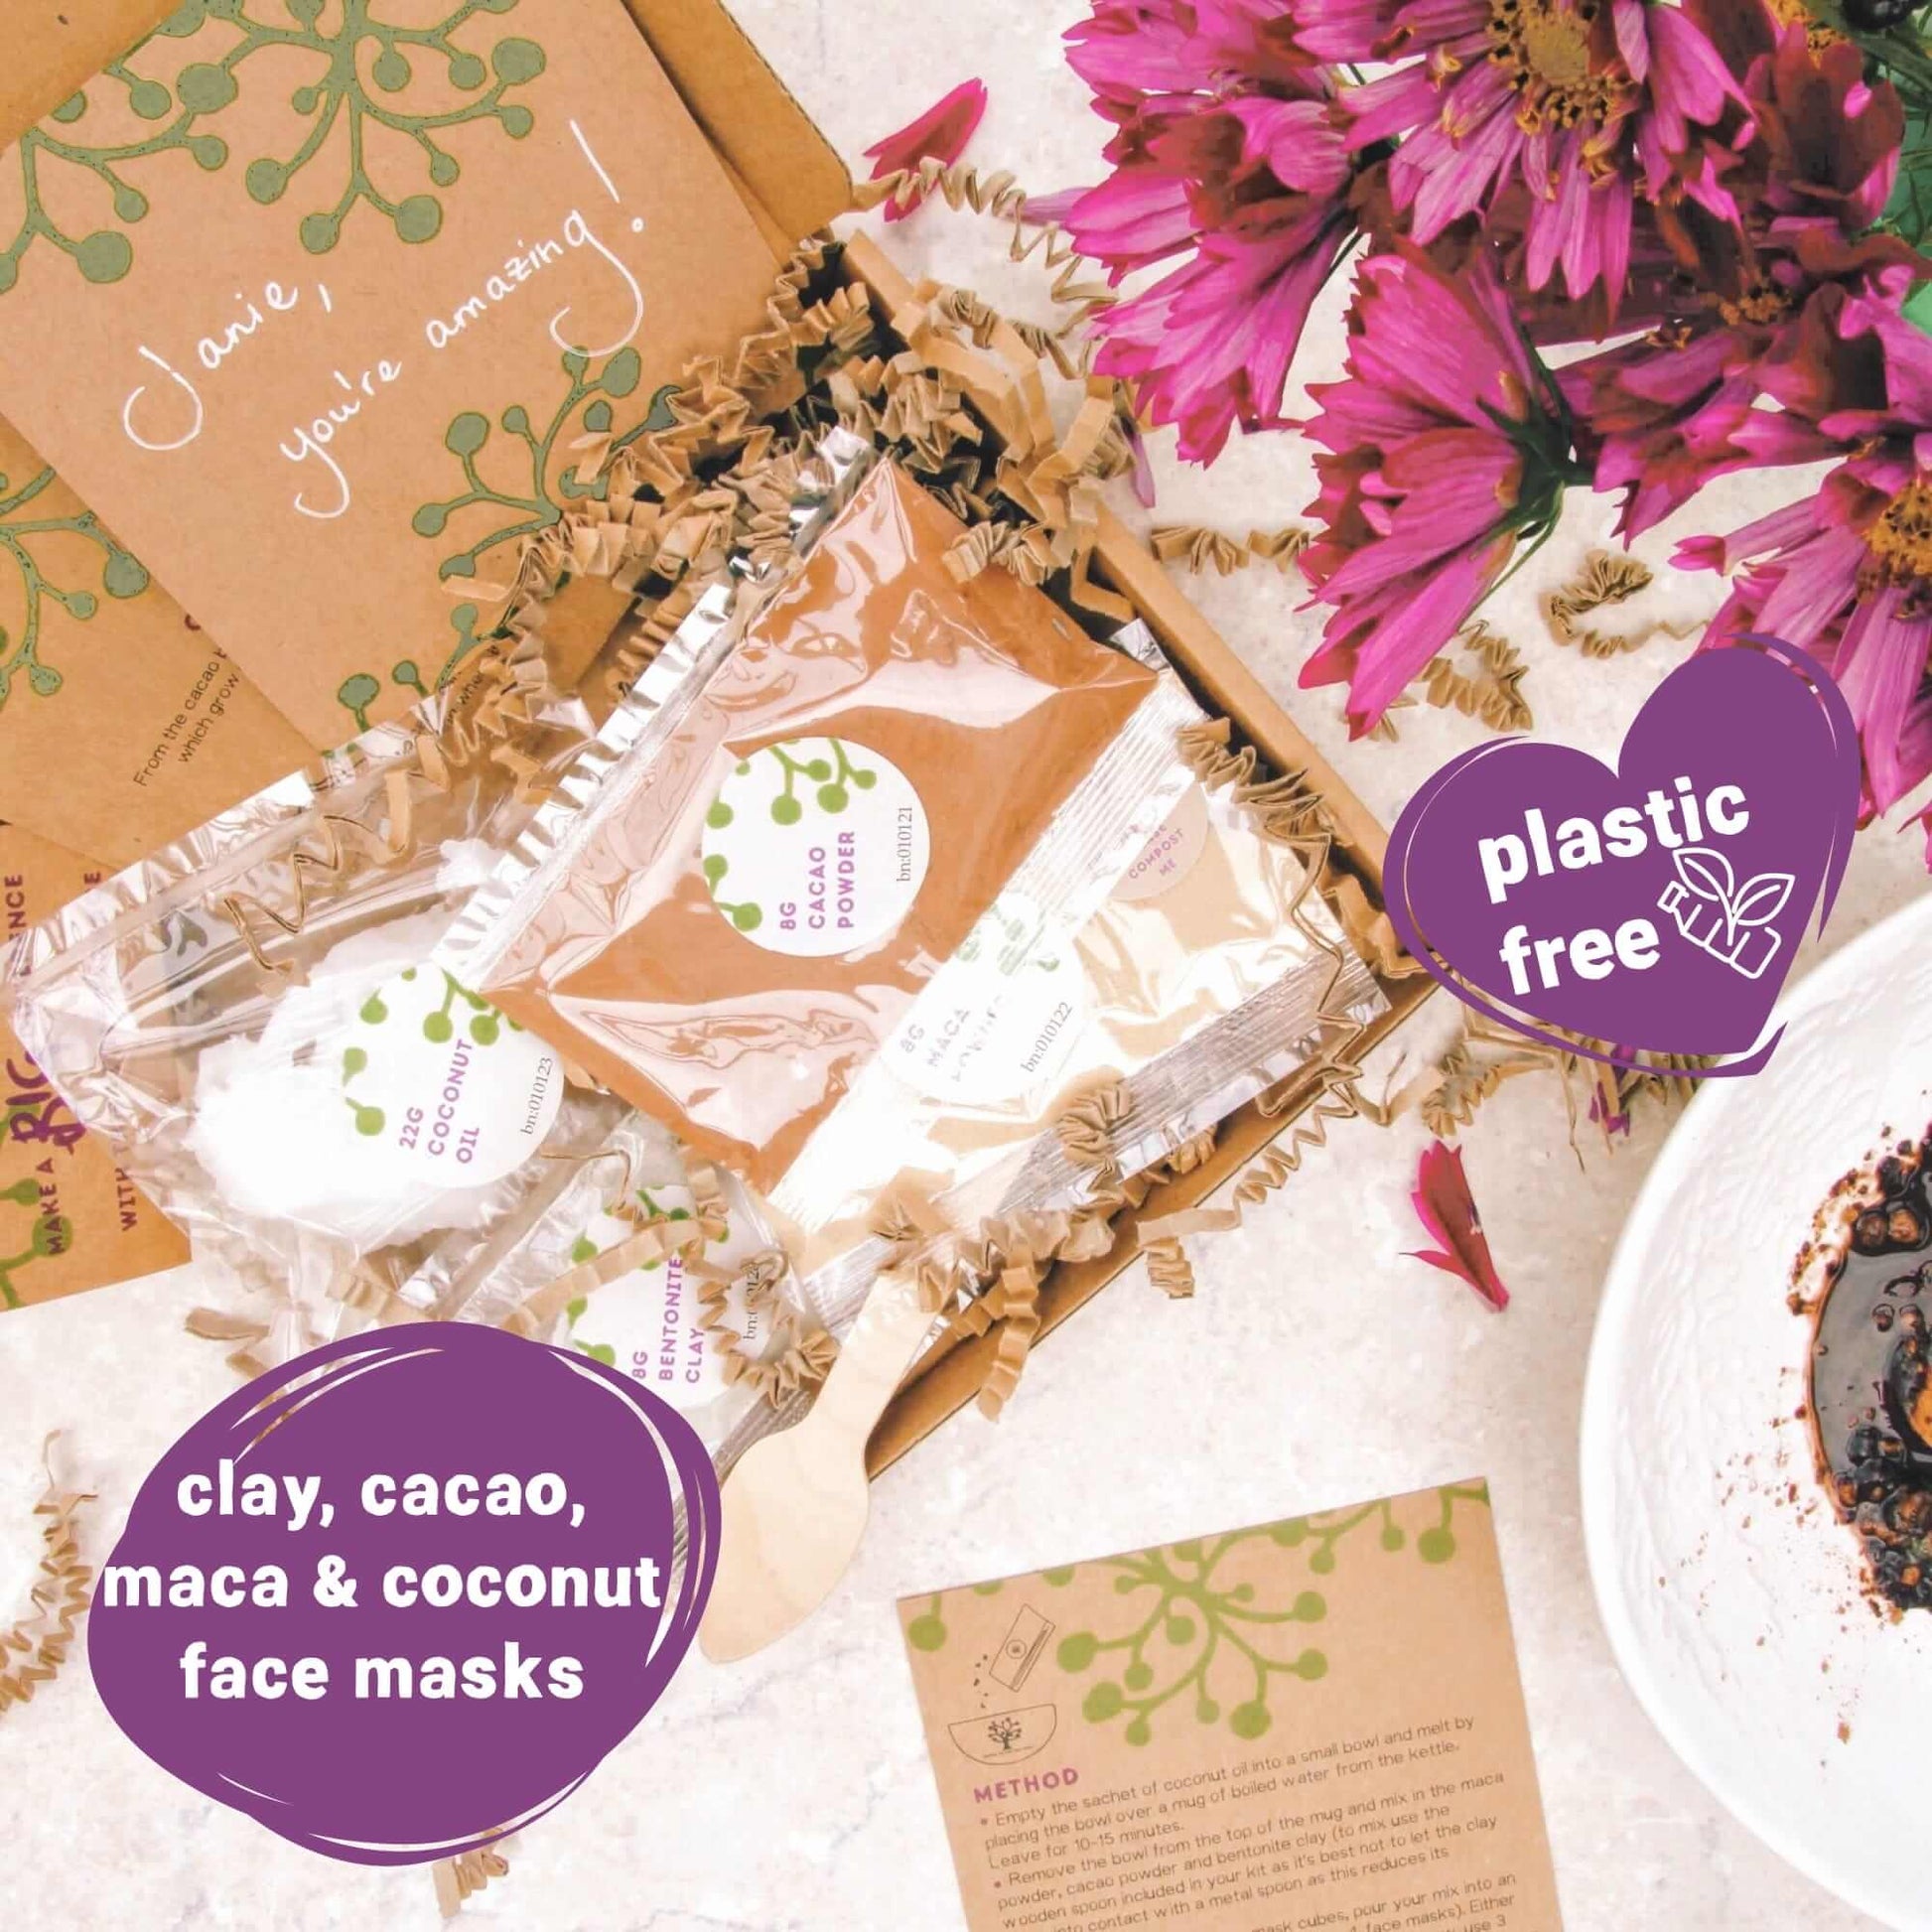 face mask kit ingredients packaged in eco-friendly, plastic free packaging